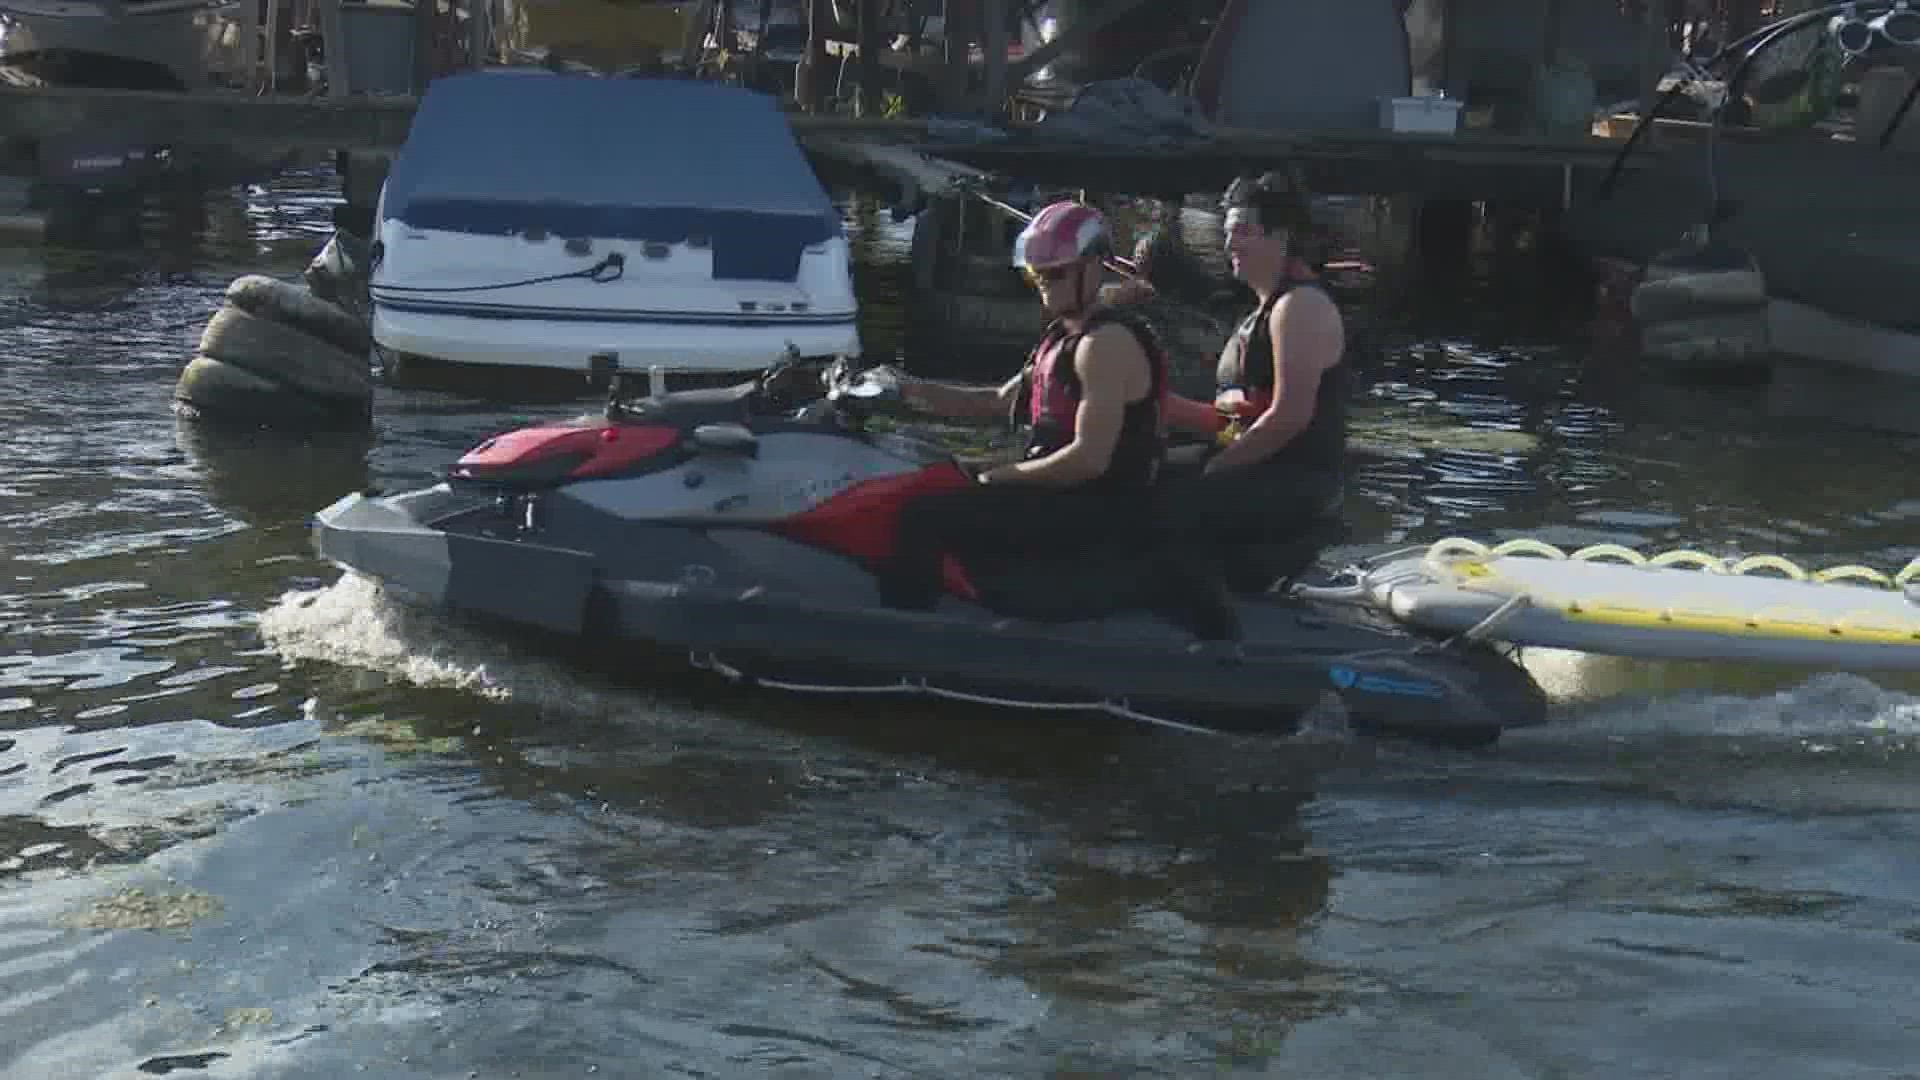 In July 2022, the Shoreline Fire Department added two jet skis to its fleet to increase response time to water rescues.